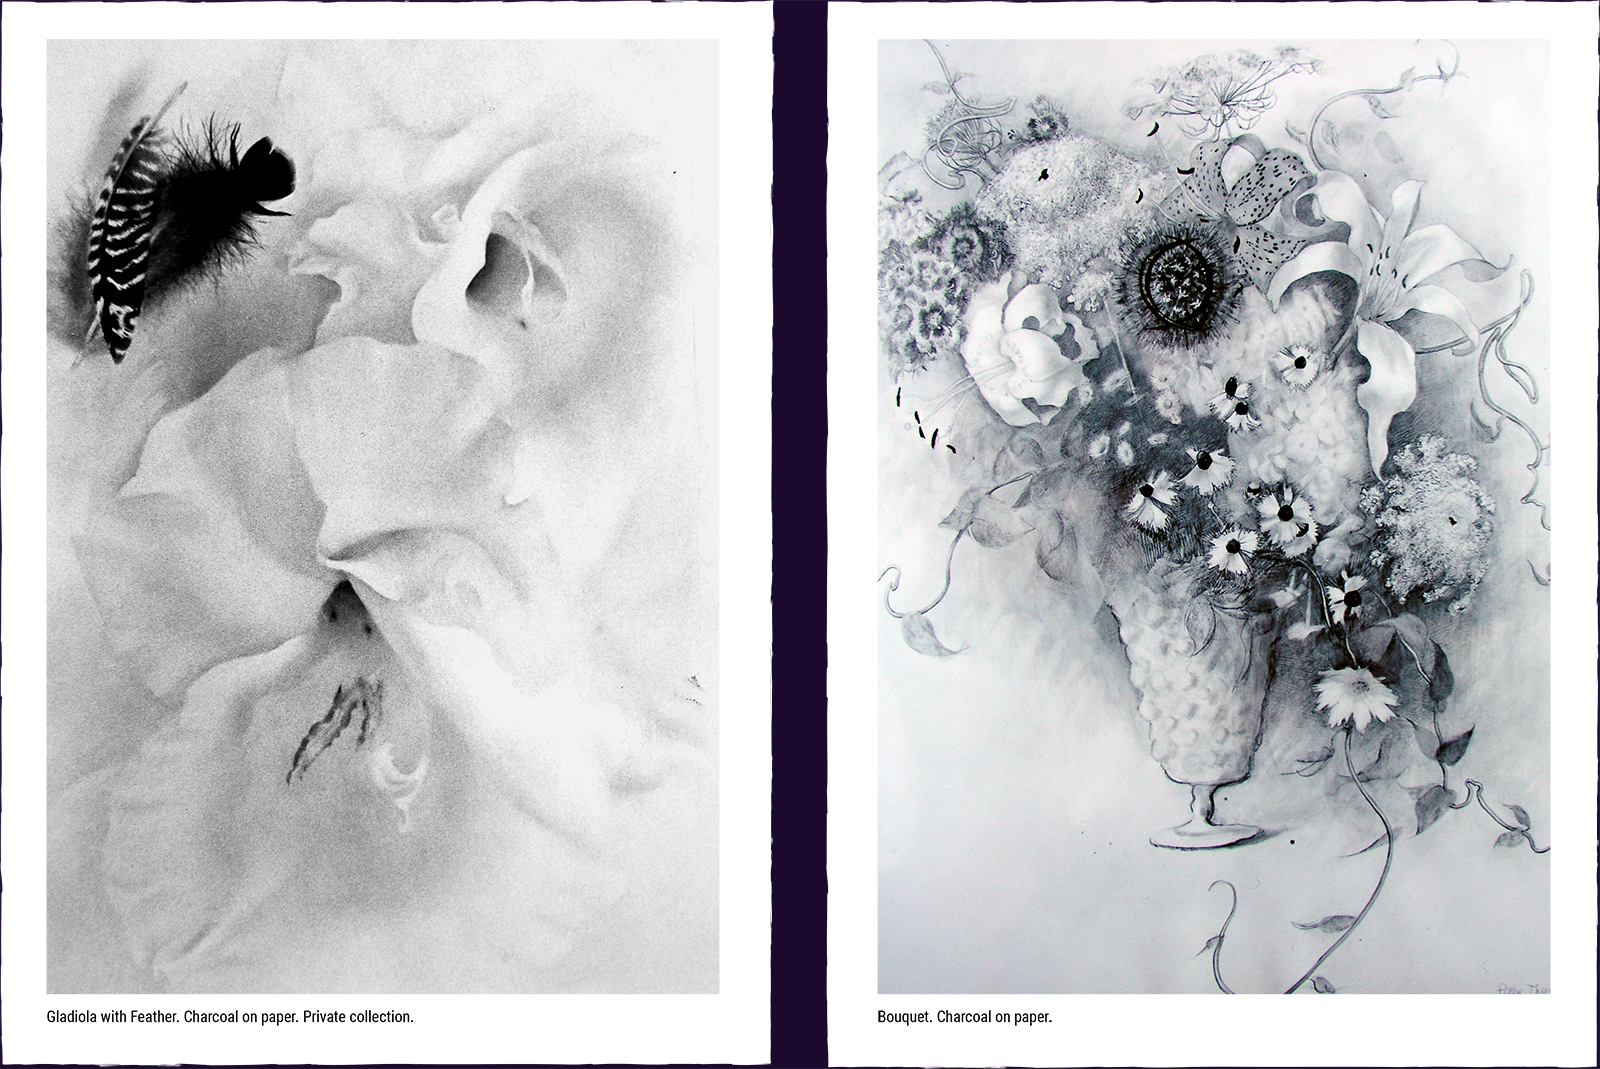 Two flower paintings. (1) Gladiola with Feather. Charcoal on paper. Private collection. (2) Bouquet. Charcoal on paper.